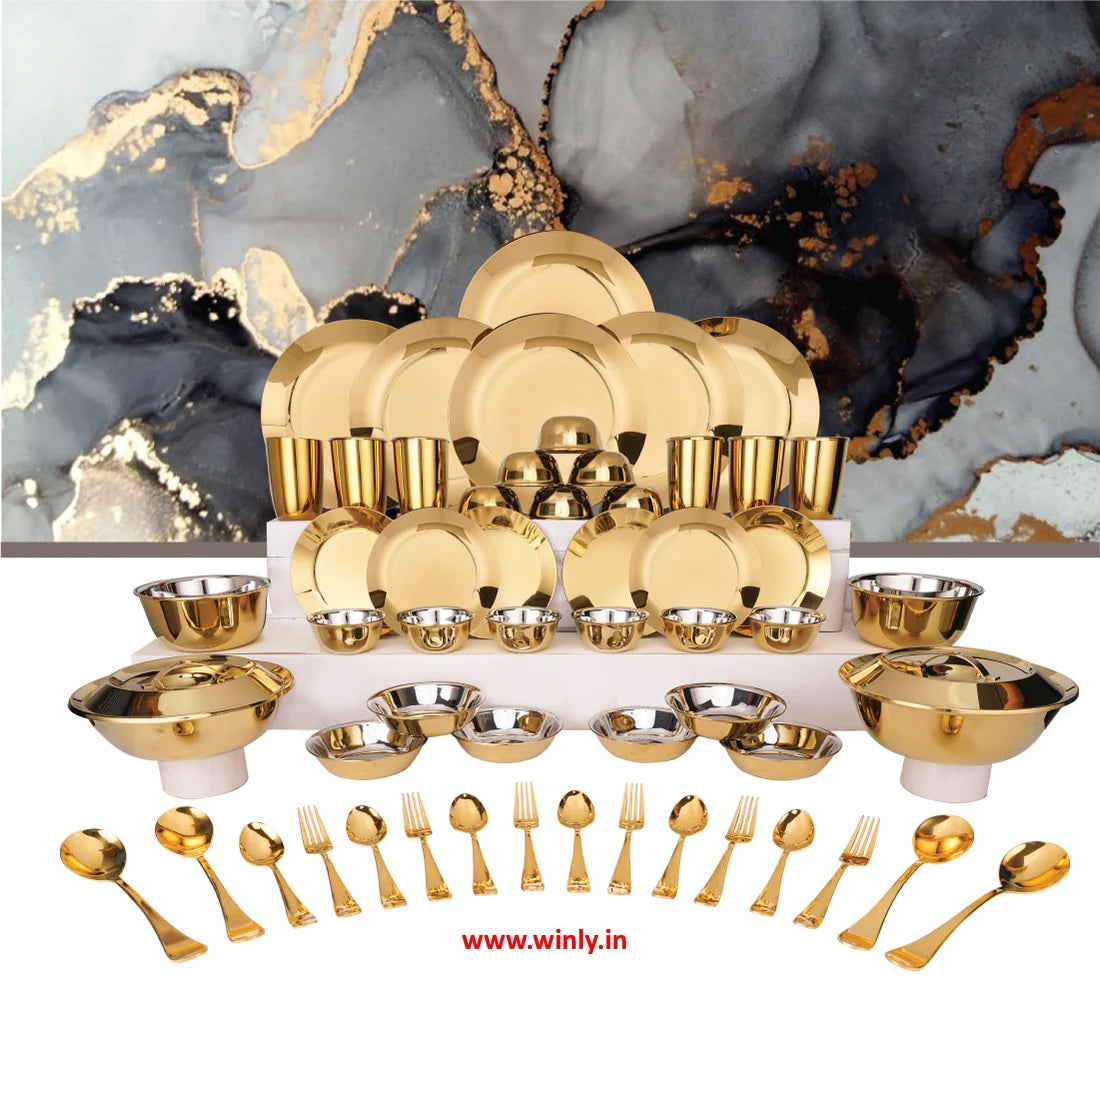 Shri & Sam Stainless Steel 64 PCS Dinner Set (6 People) with Gold PVD Coating Signature - Shiny